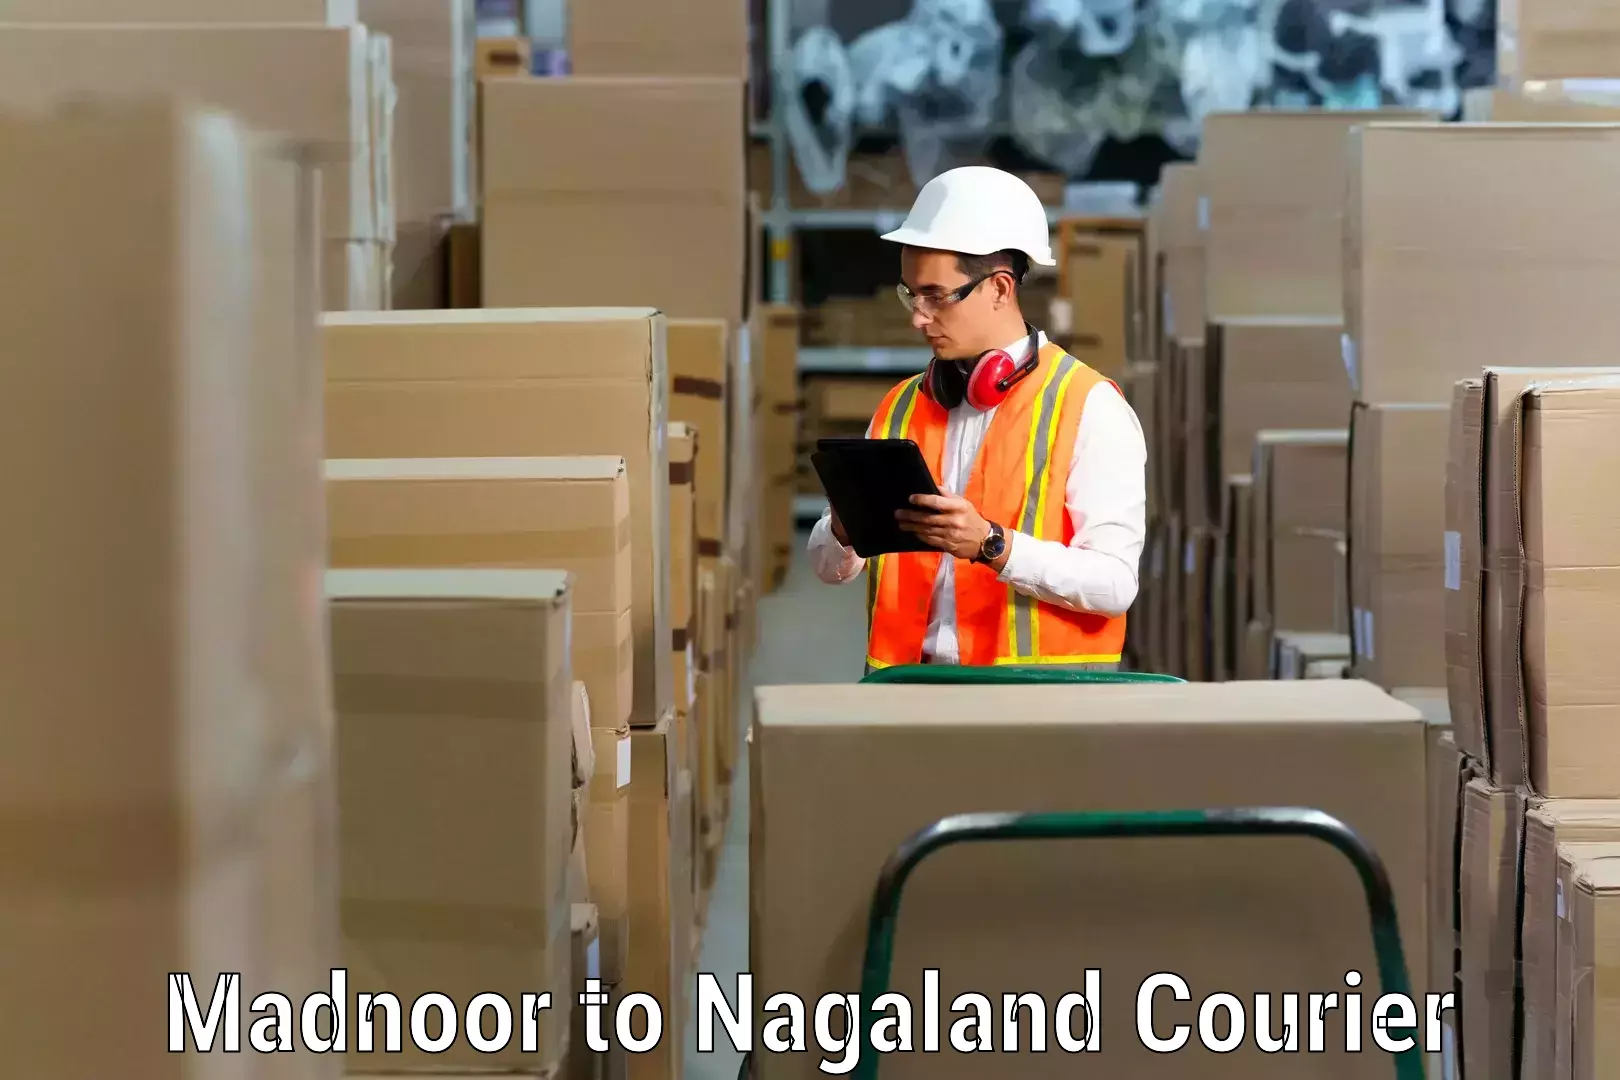 Furniture transport company Madnoor to Nagaland